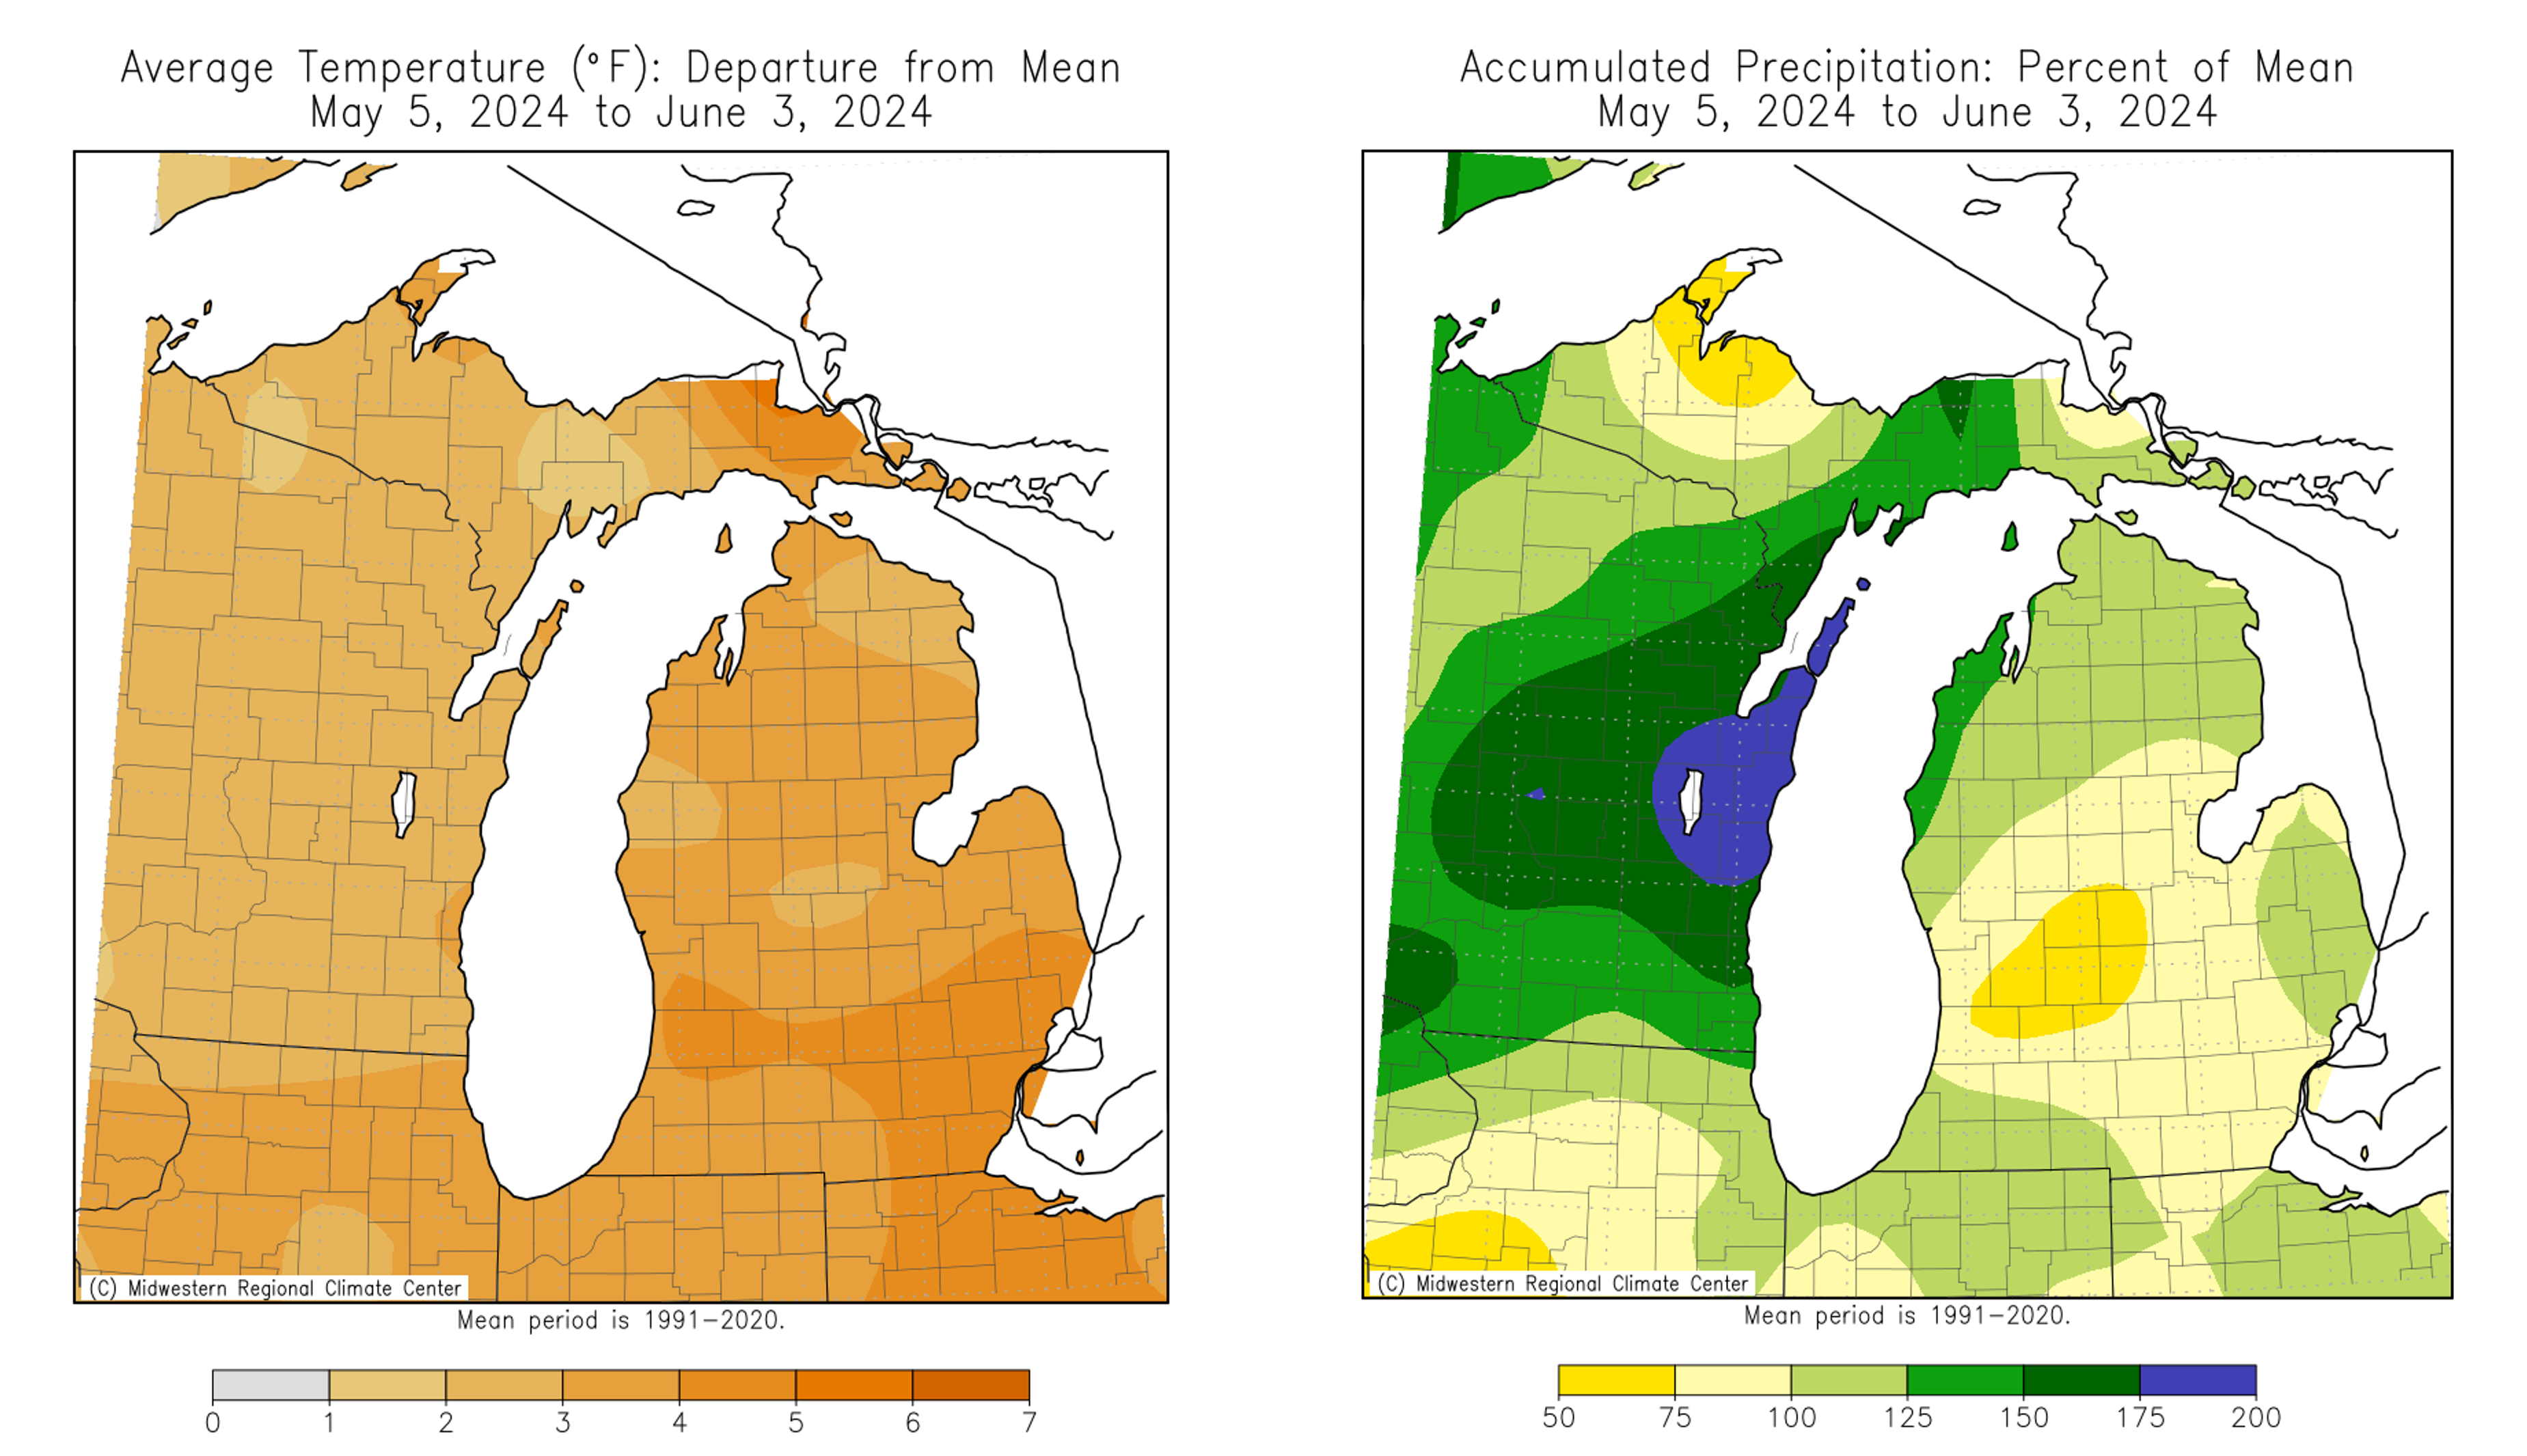 Maps of Michigan showing the 30-day temperature and precipitation departure from mean.